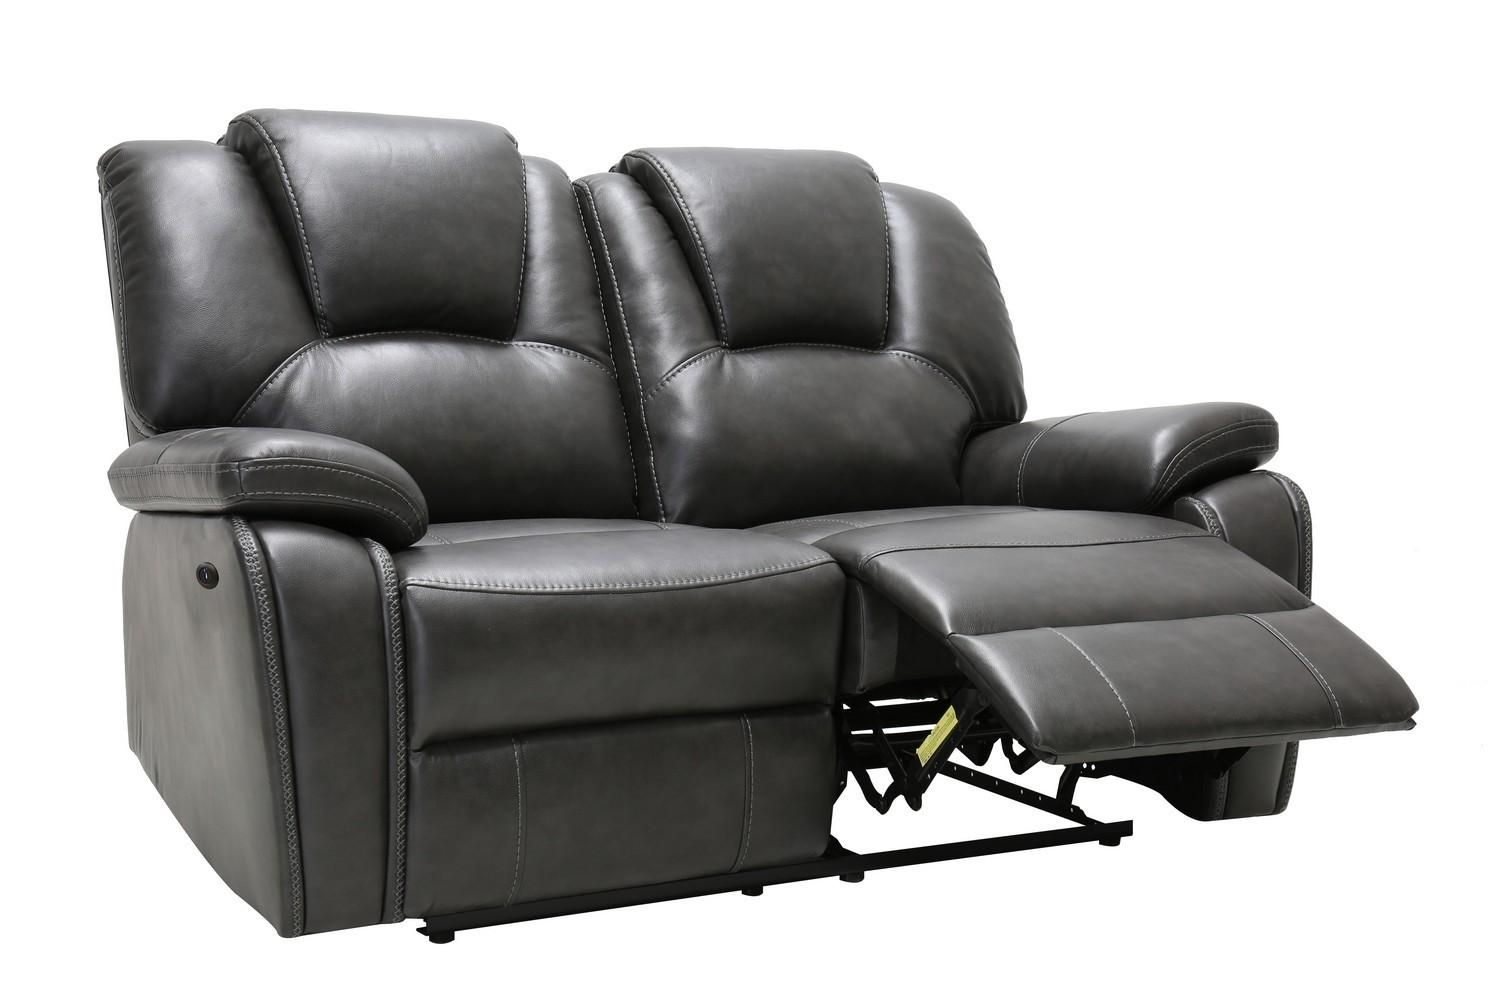 Contemporary Reclining Loveseat 7993-GRAY 7993-GRAY-L in Gray Leather Air Material